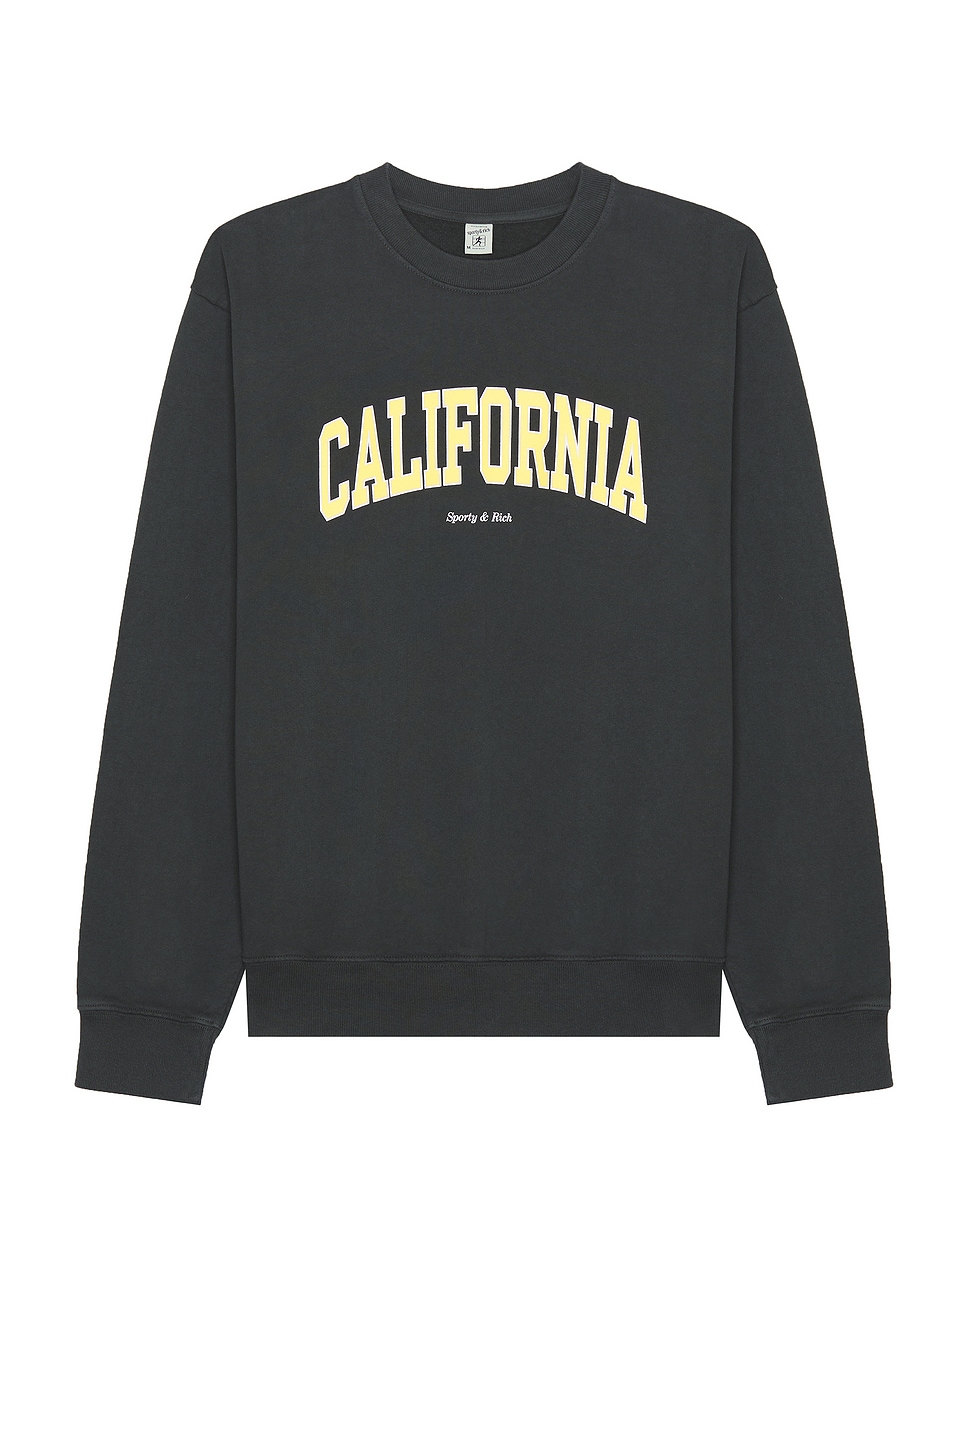 Image 1 of Sporty & Rich California Crewneck in Faded Black